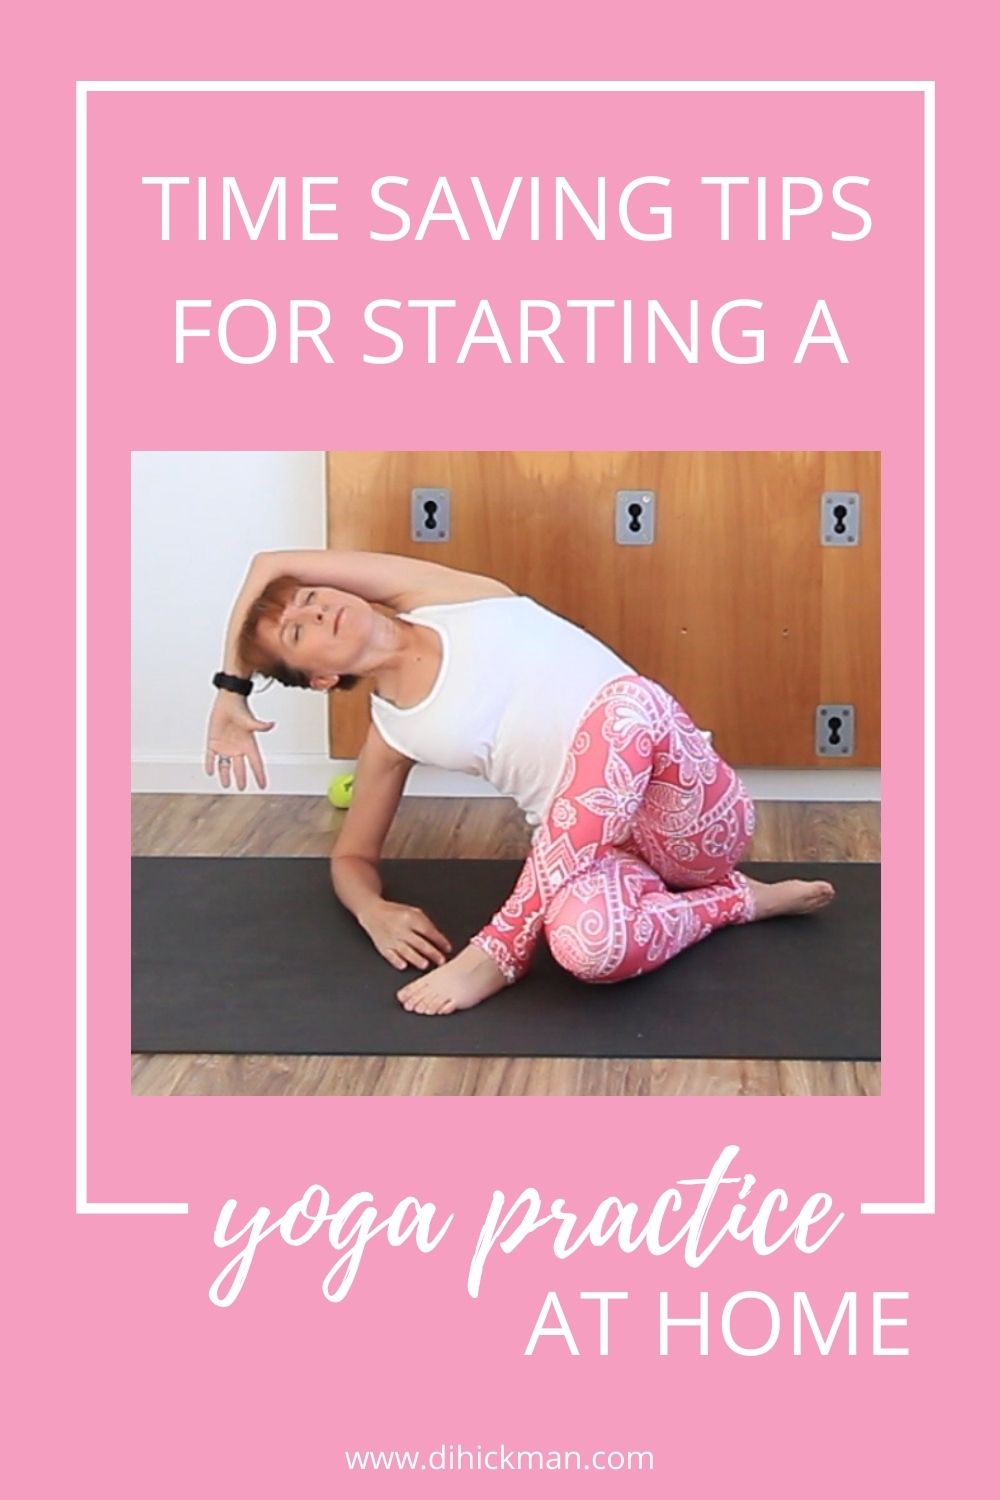 Time saving tips for starting a yoga practice at home